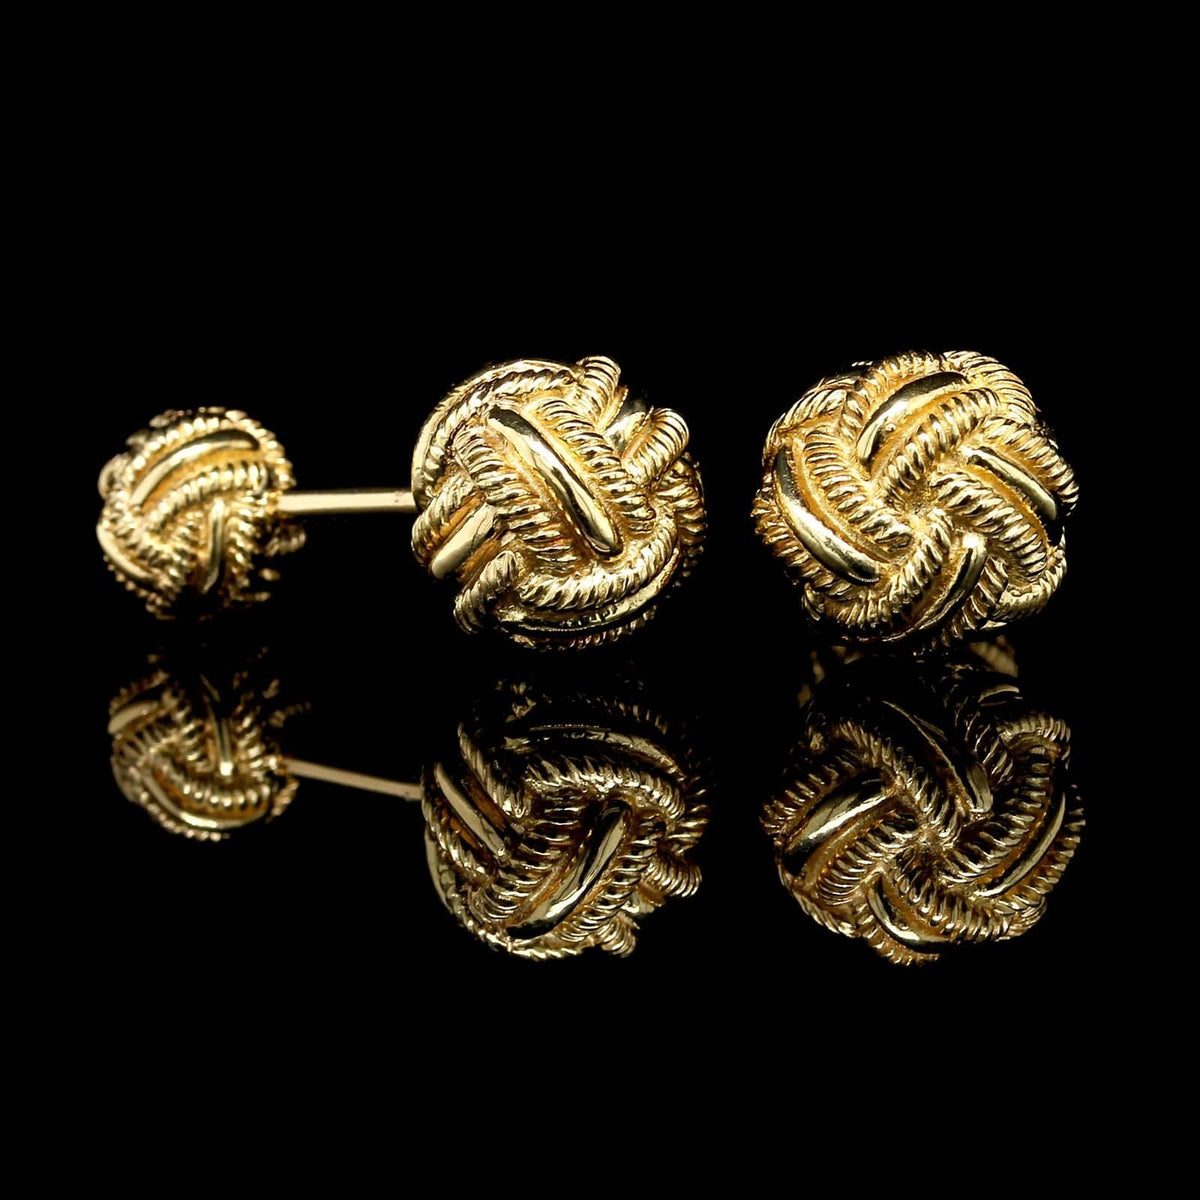 Schlumberger for Tiffany & Co. 18K Yellow Gold Estate Knot Barbell Cufflinks